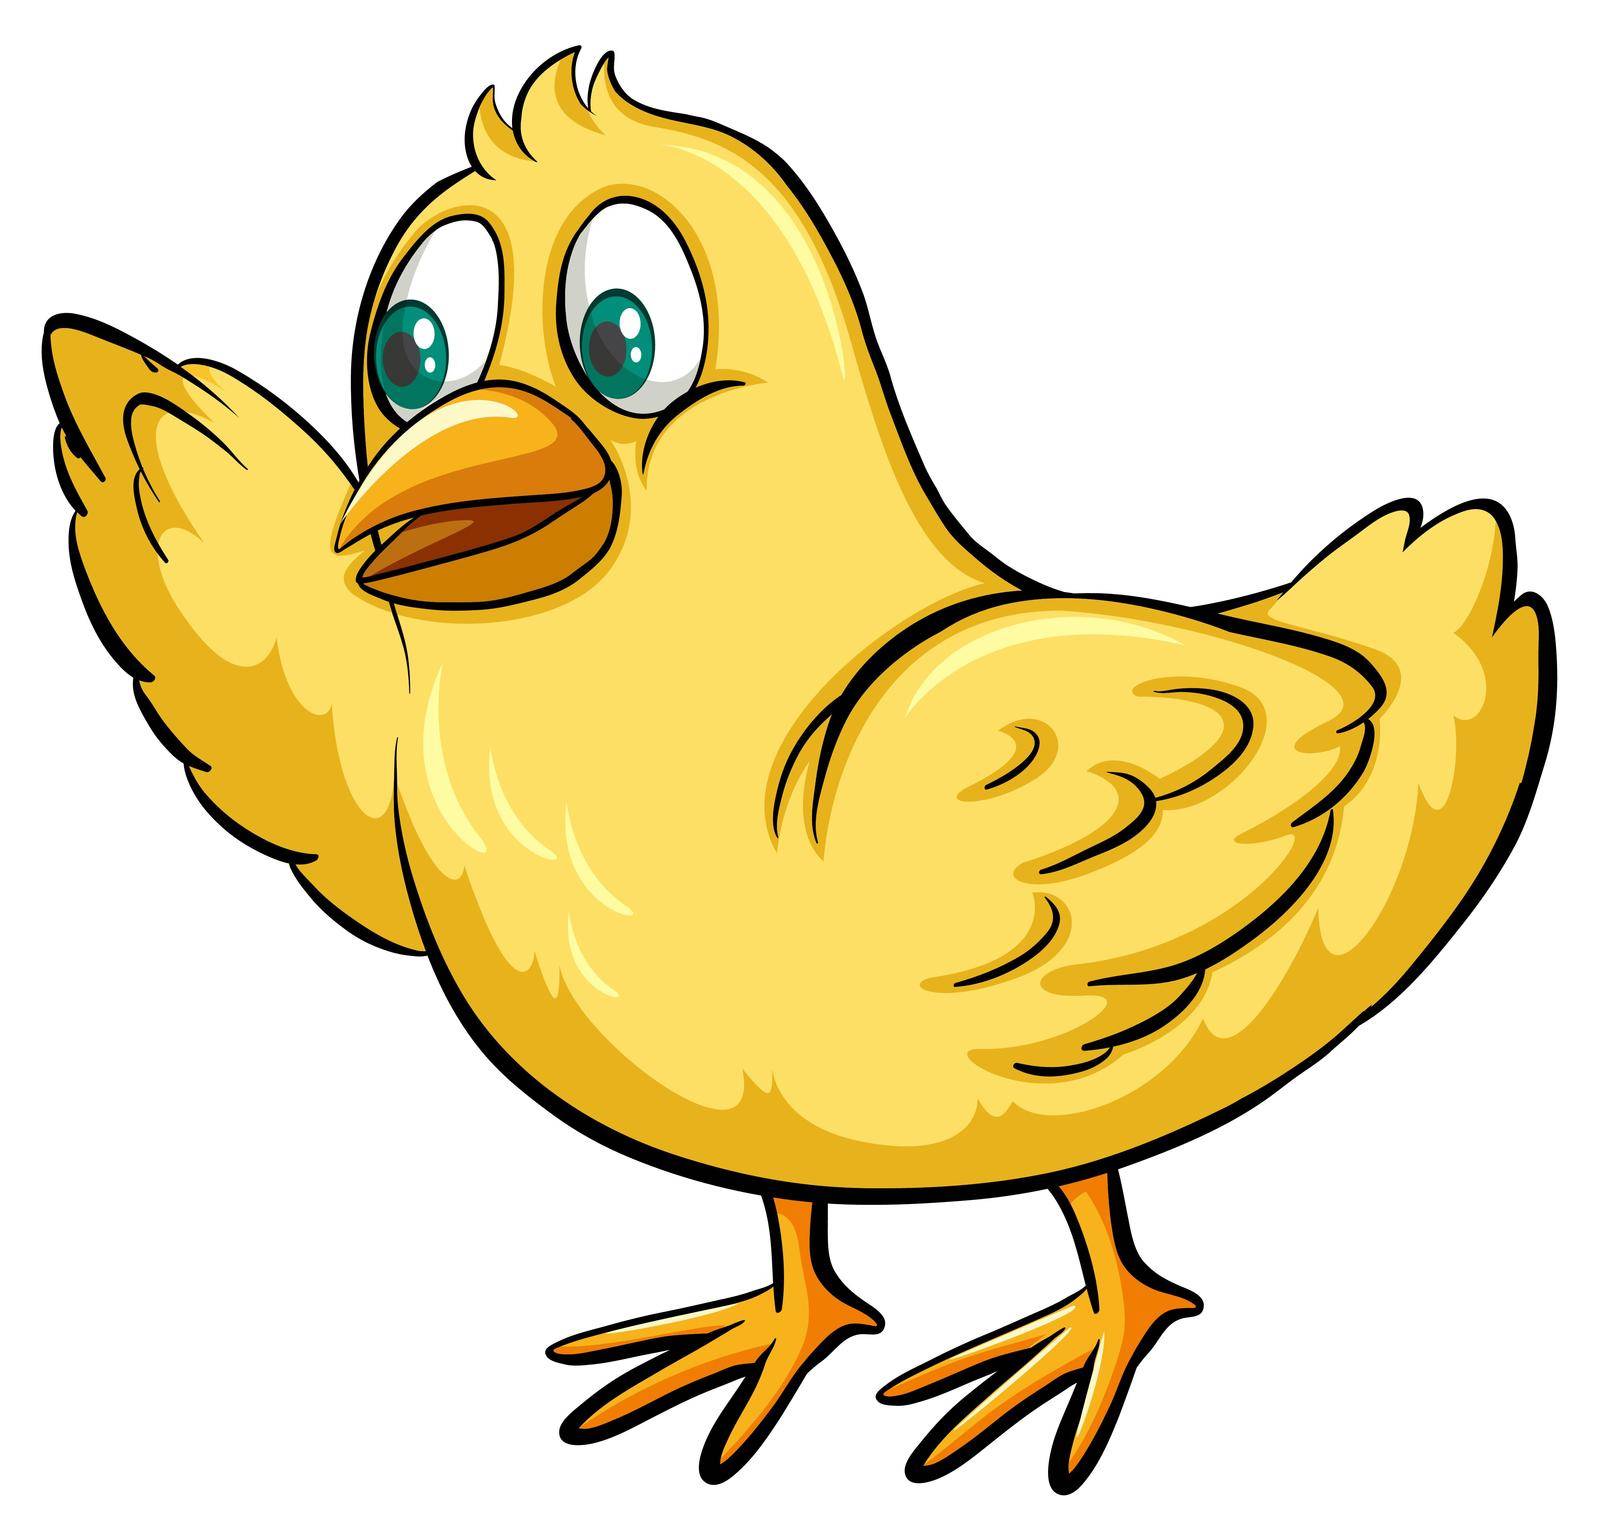 One yellow chick on a white background